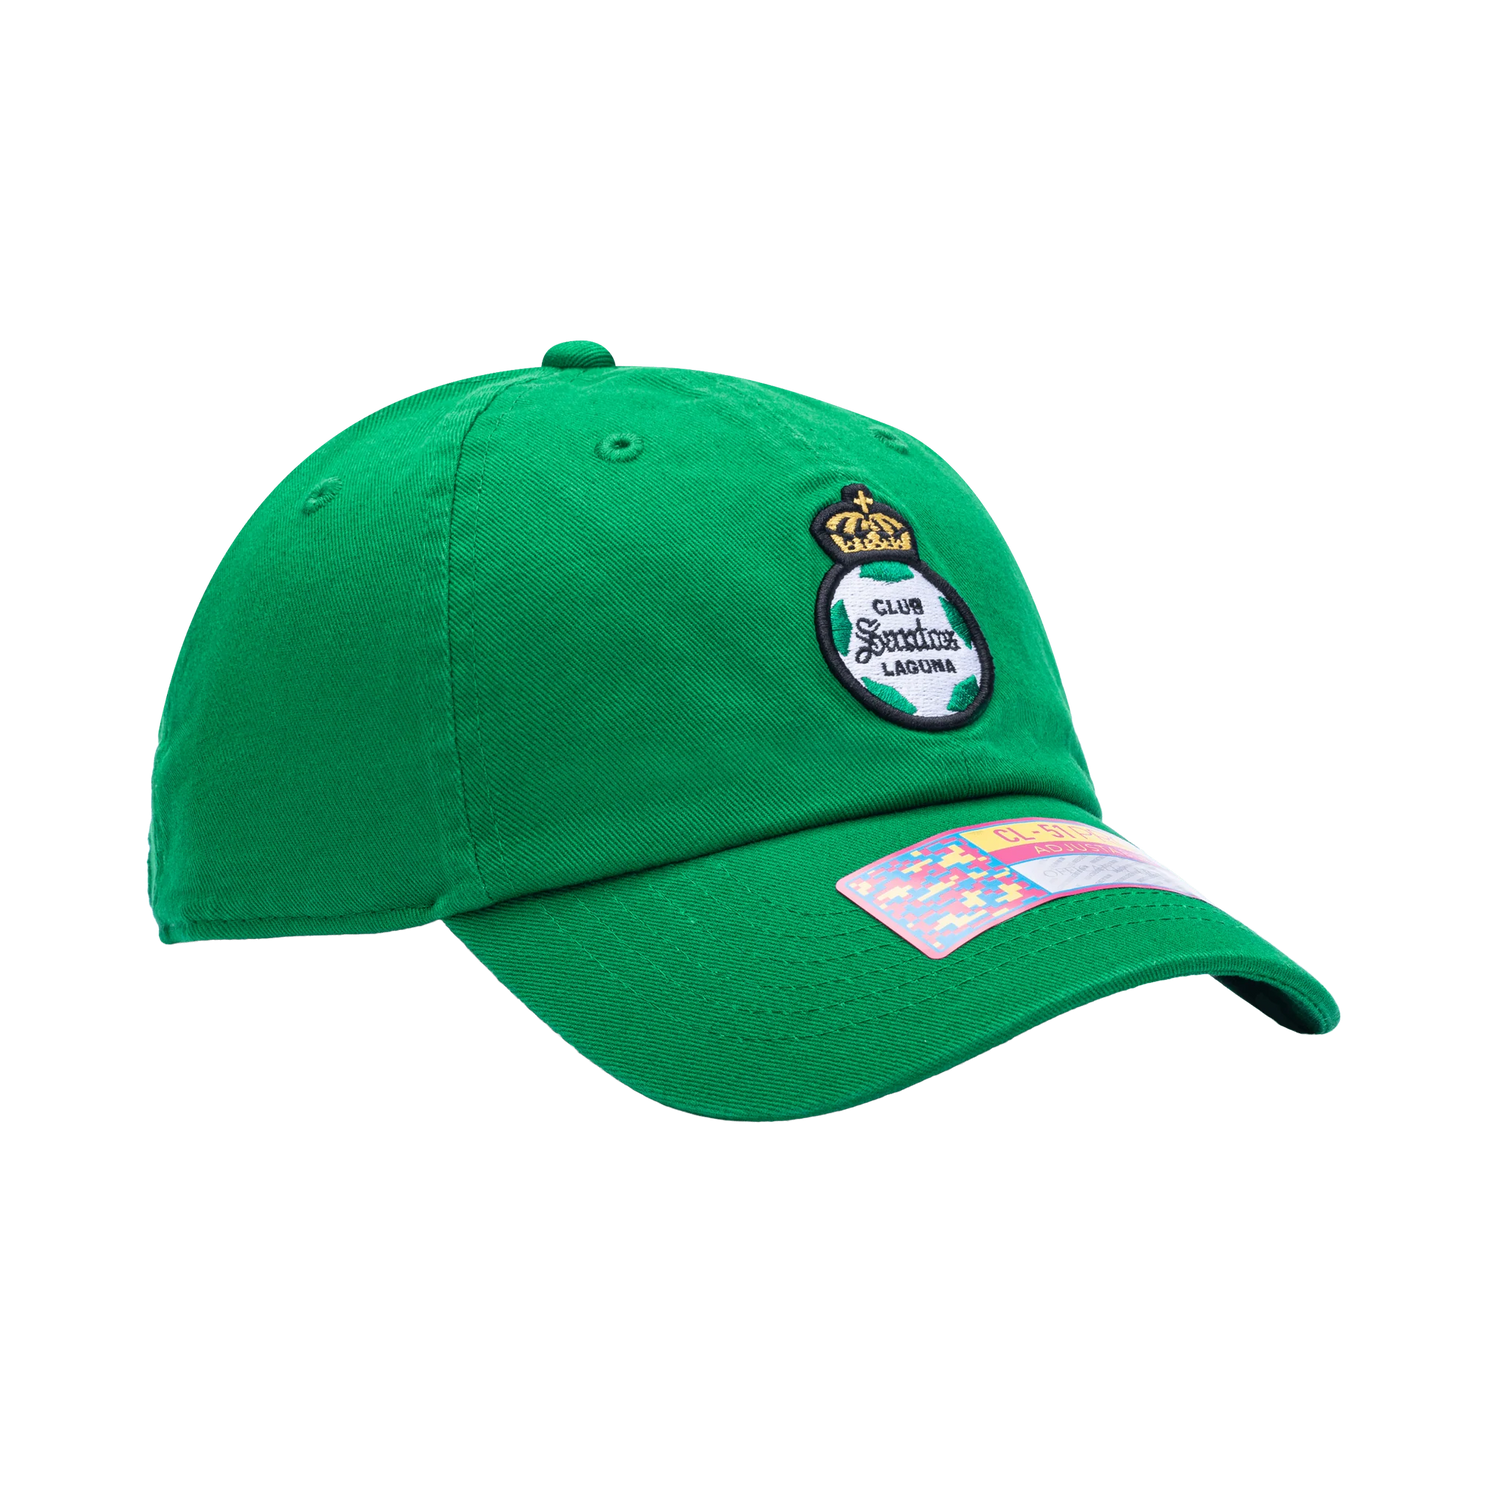 FI Collection Club Santos Bambo Classic Hat (Lateral - Side 2)